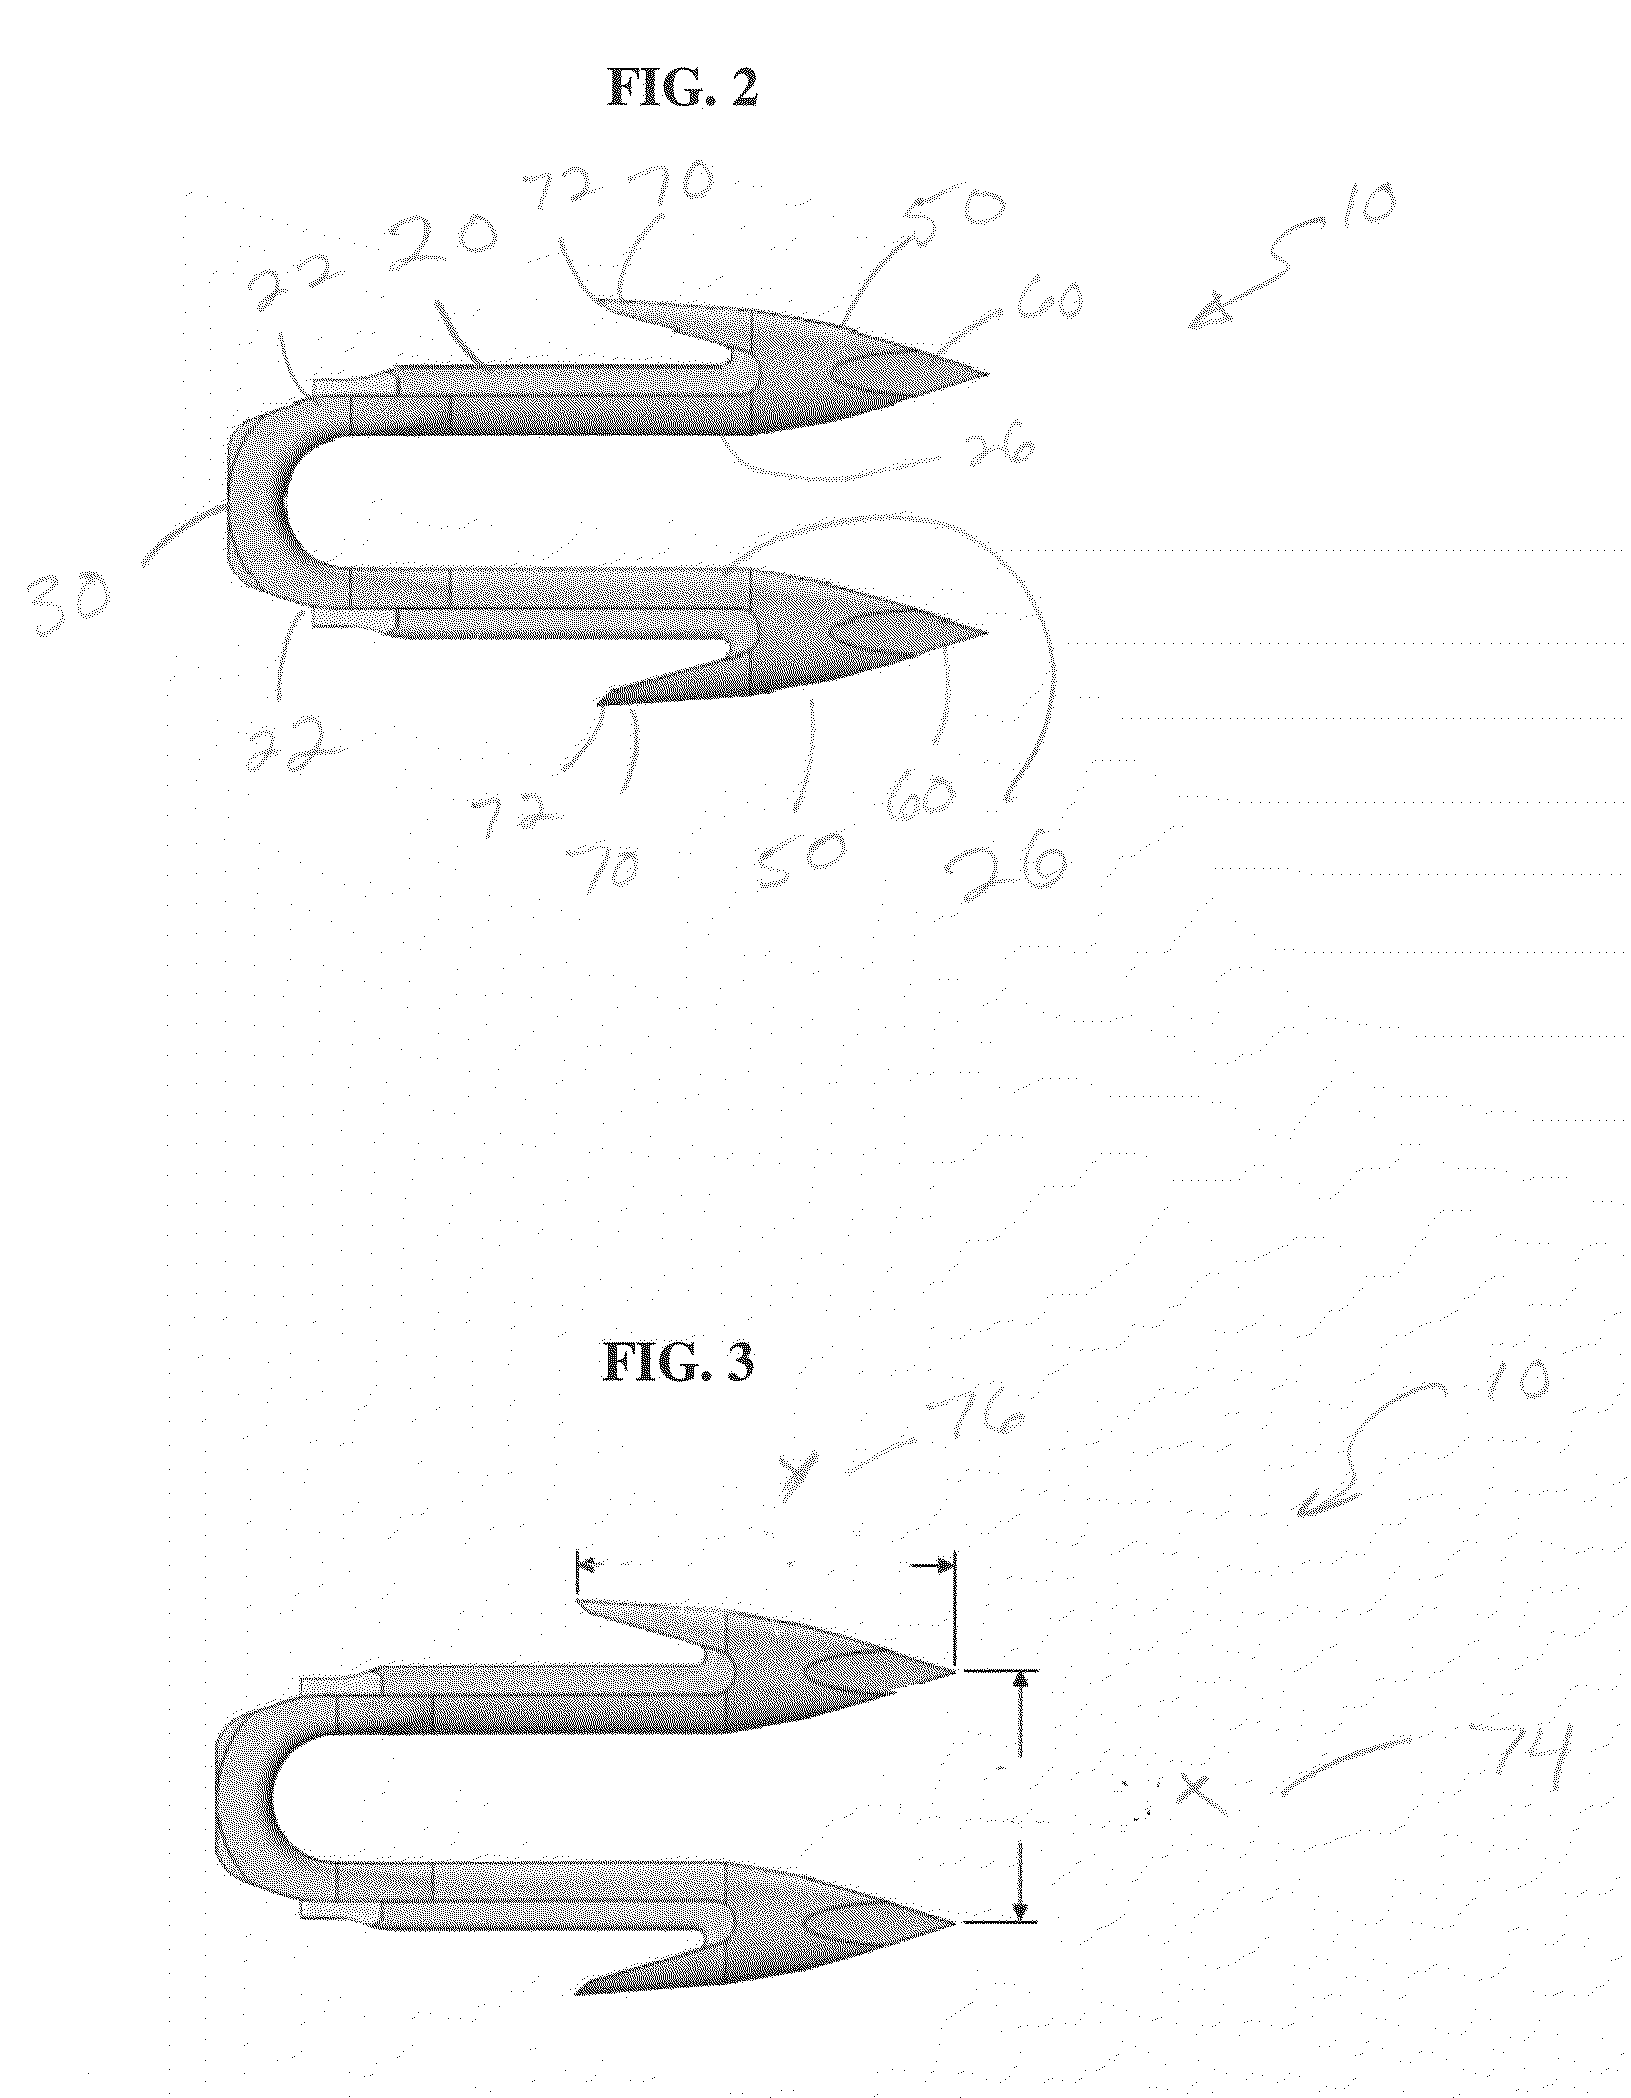 Bioabsorbable Polymeric Compositions, Processing Methods, and Medical Devices Therefrom